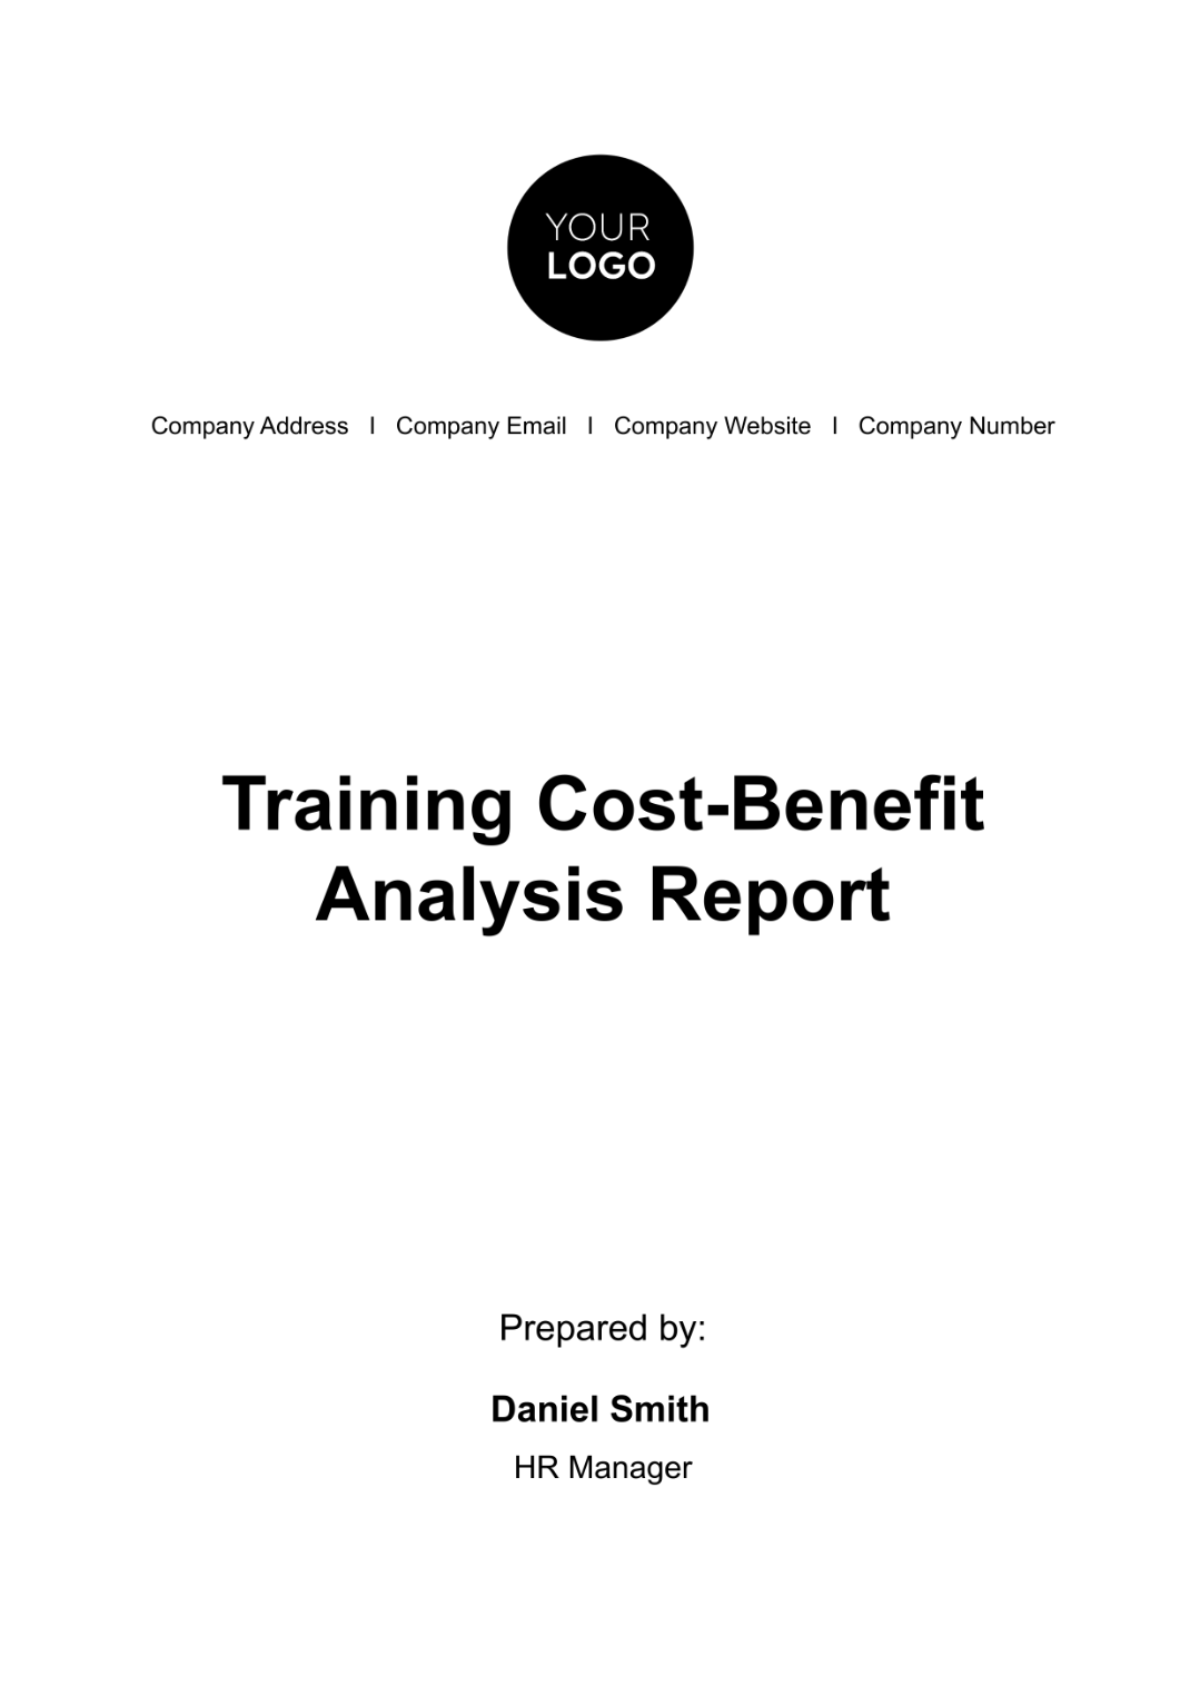 Free Training Cost-Benefit Analysis Report HR Template